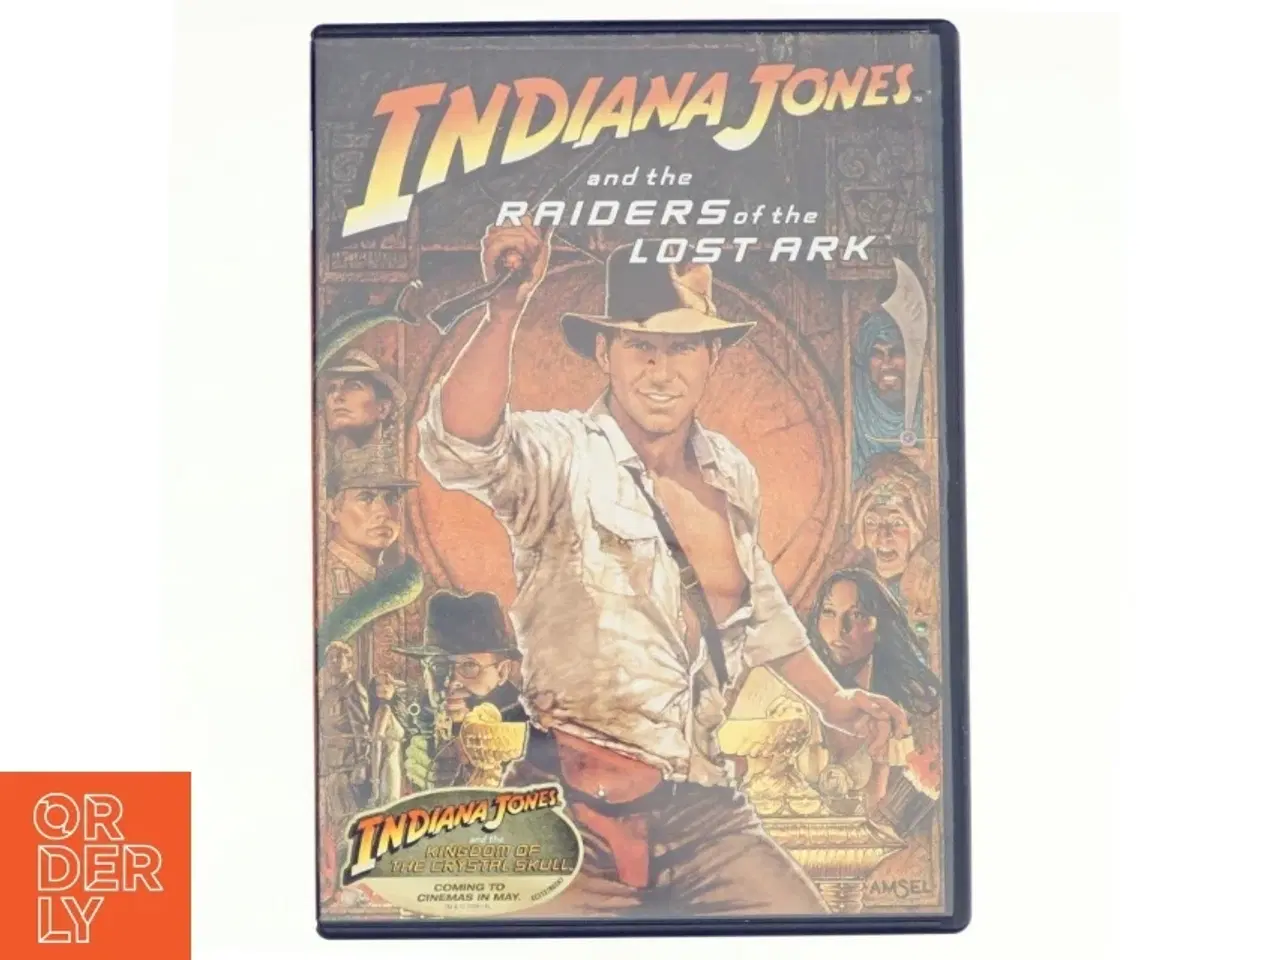 Billede 1 - Indiana Jones, and the raiders of the lost ark